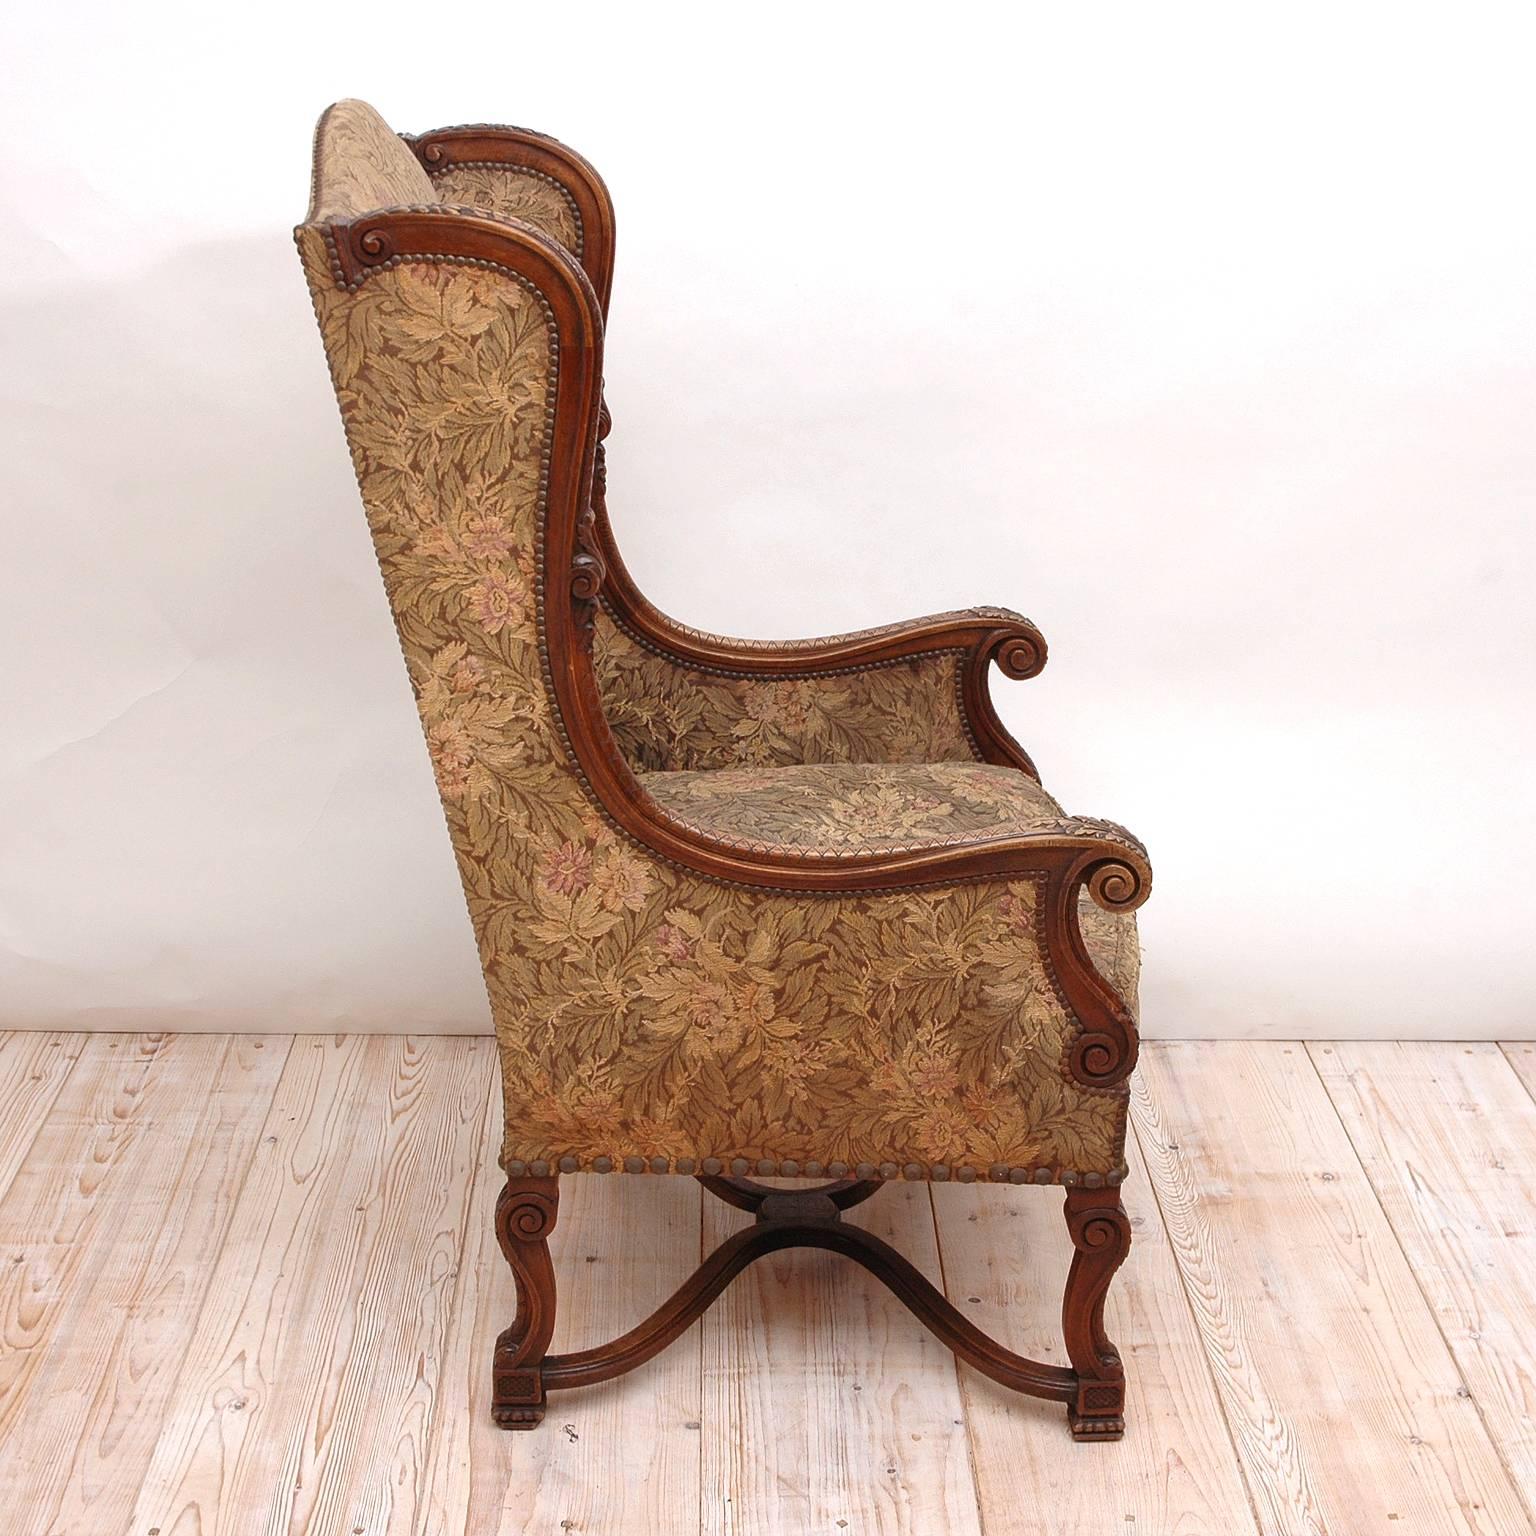 Walnut 19th Century Neo-Renaissance Style Carved Wingback Chair with Upholstery For Sale